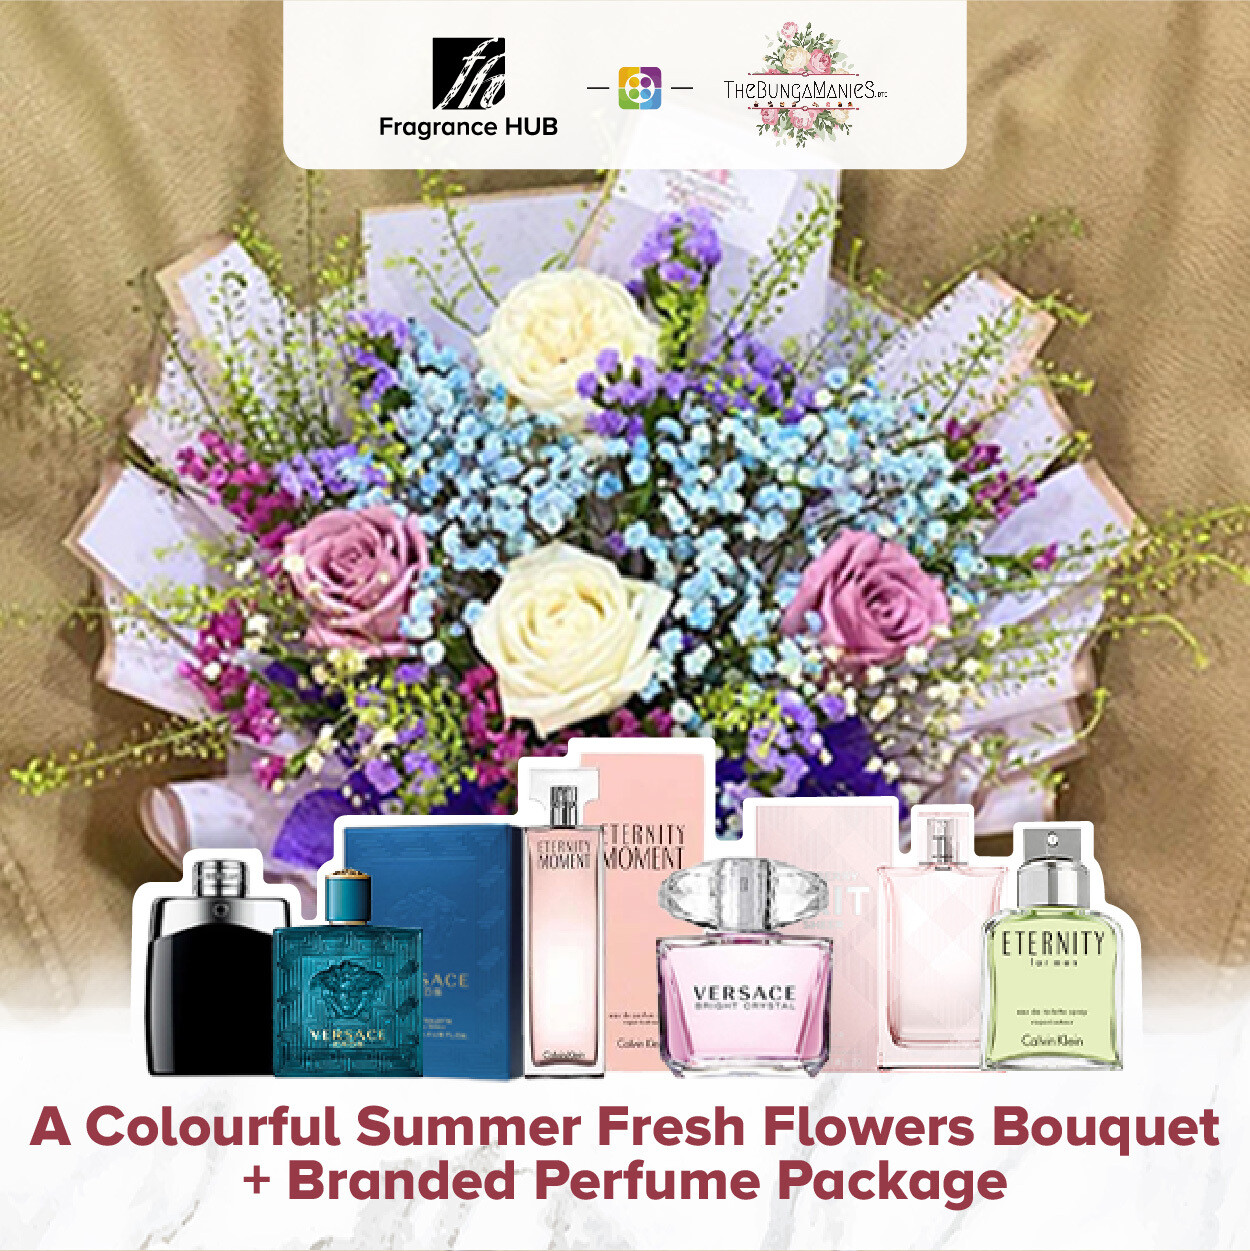 A Colourful Summer Fresh Flowers Bouquet + Fragrance Hub Branded Perfume (By: The Bunga Manies from Bintulu)